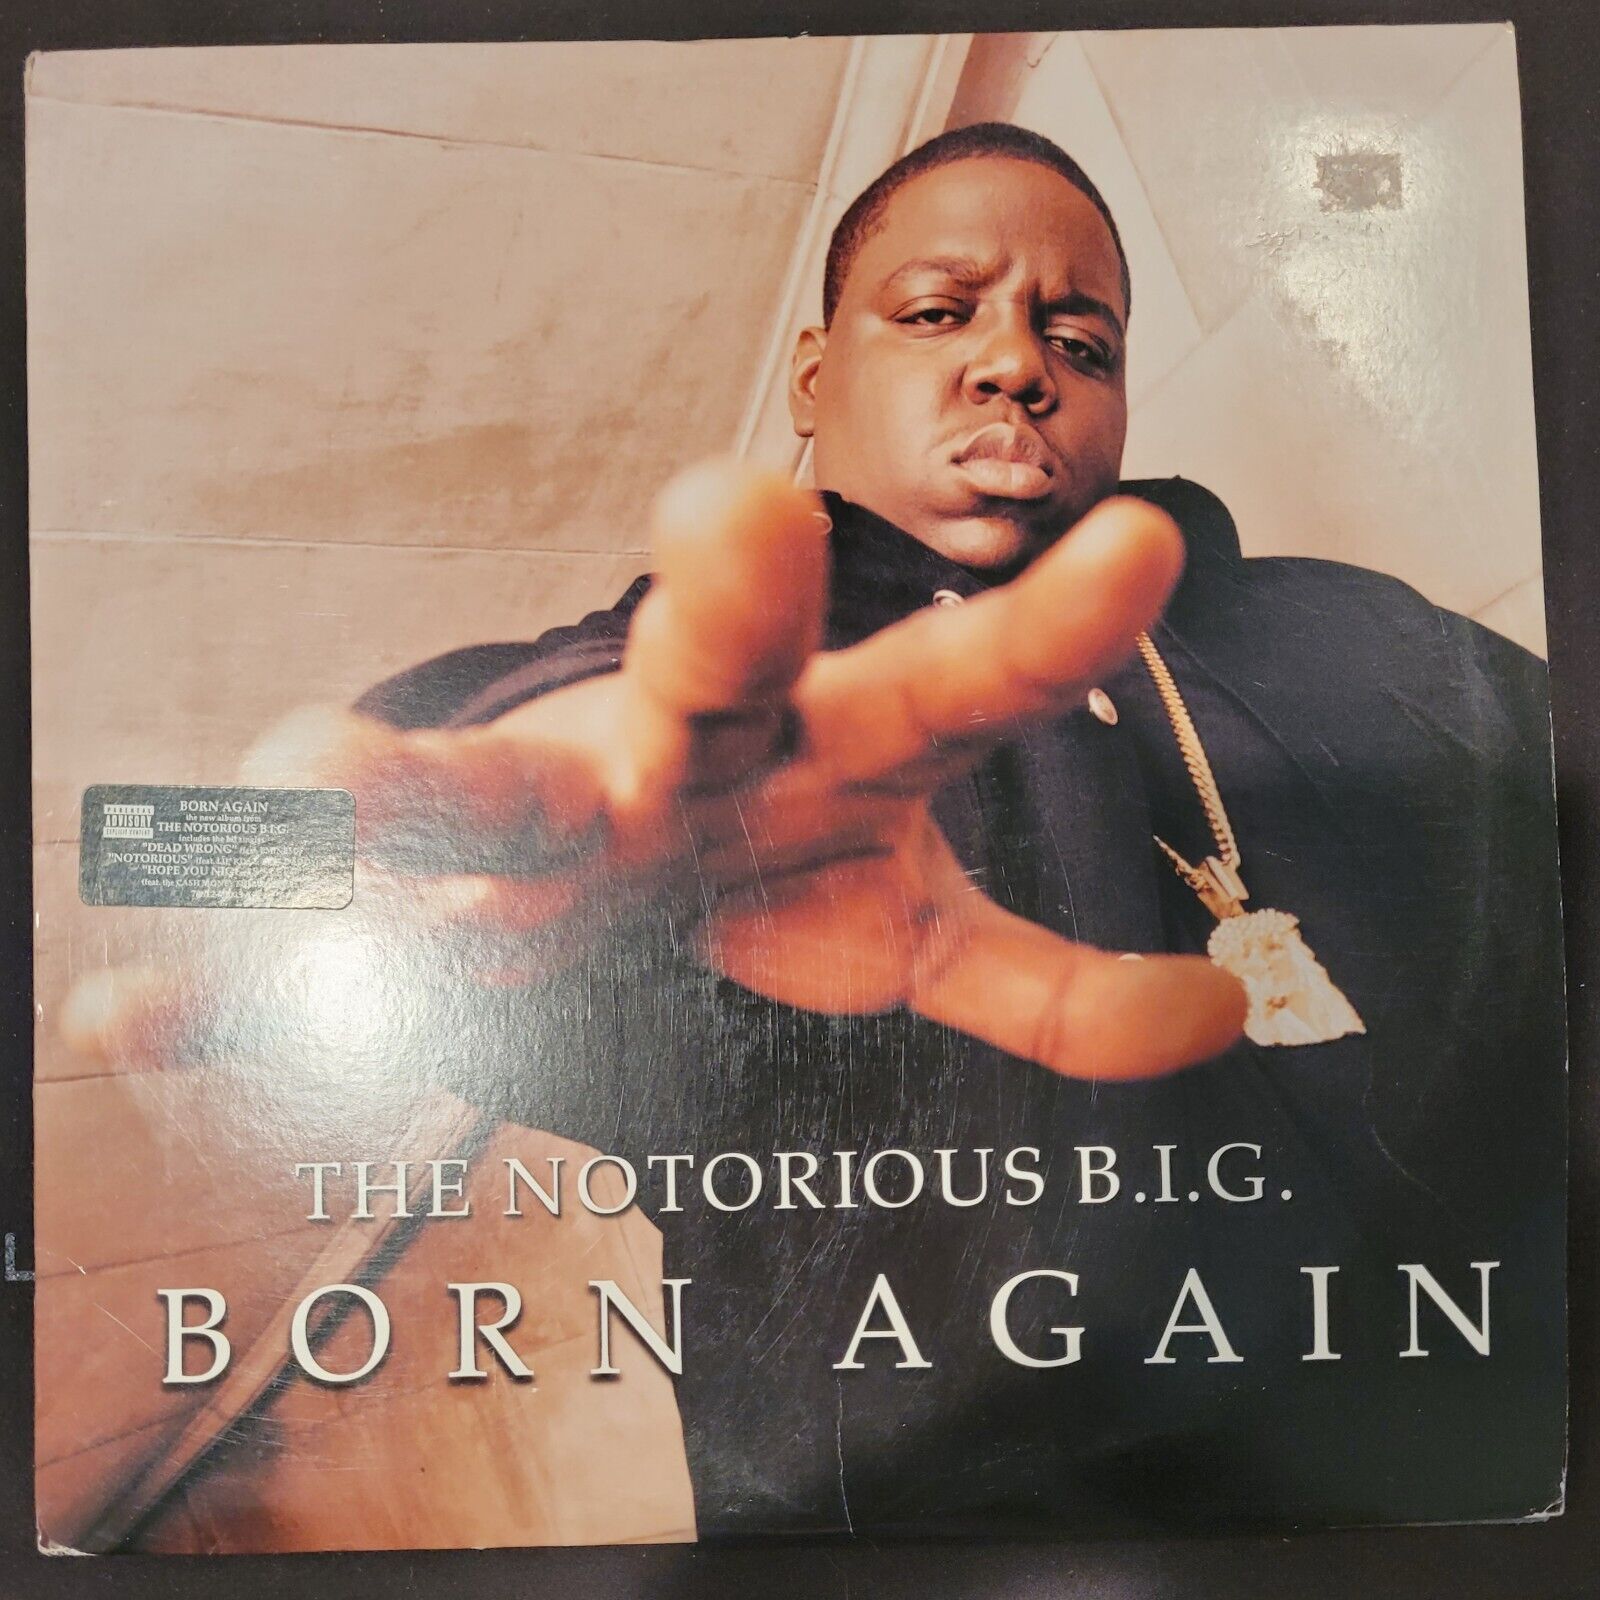 THE NOTORIOUS BIG  BORN AGAIN - VINYL  2-LP SET -  NEVER BEEN USED - New